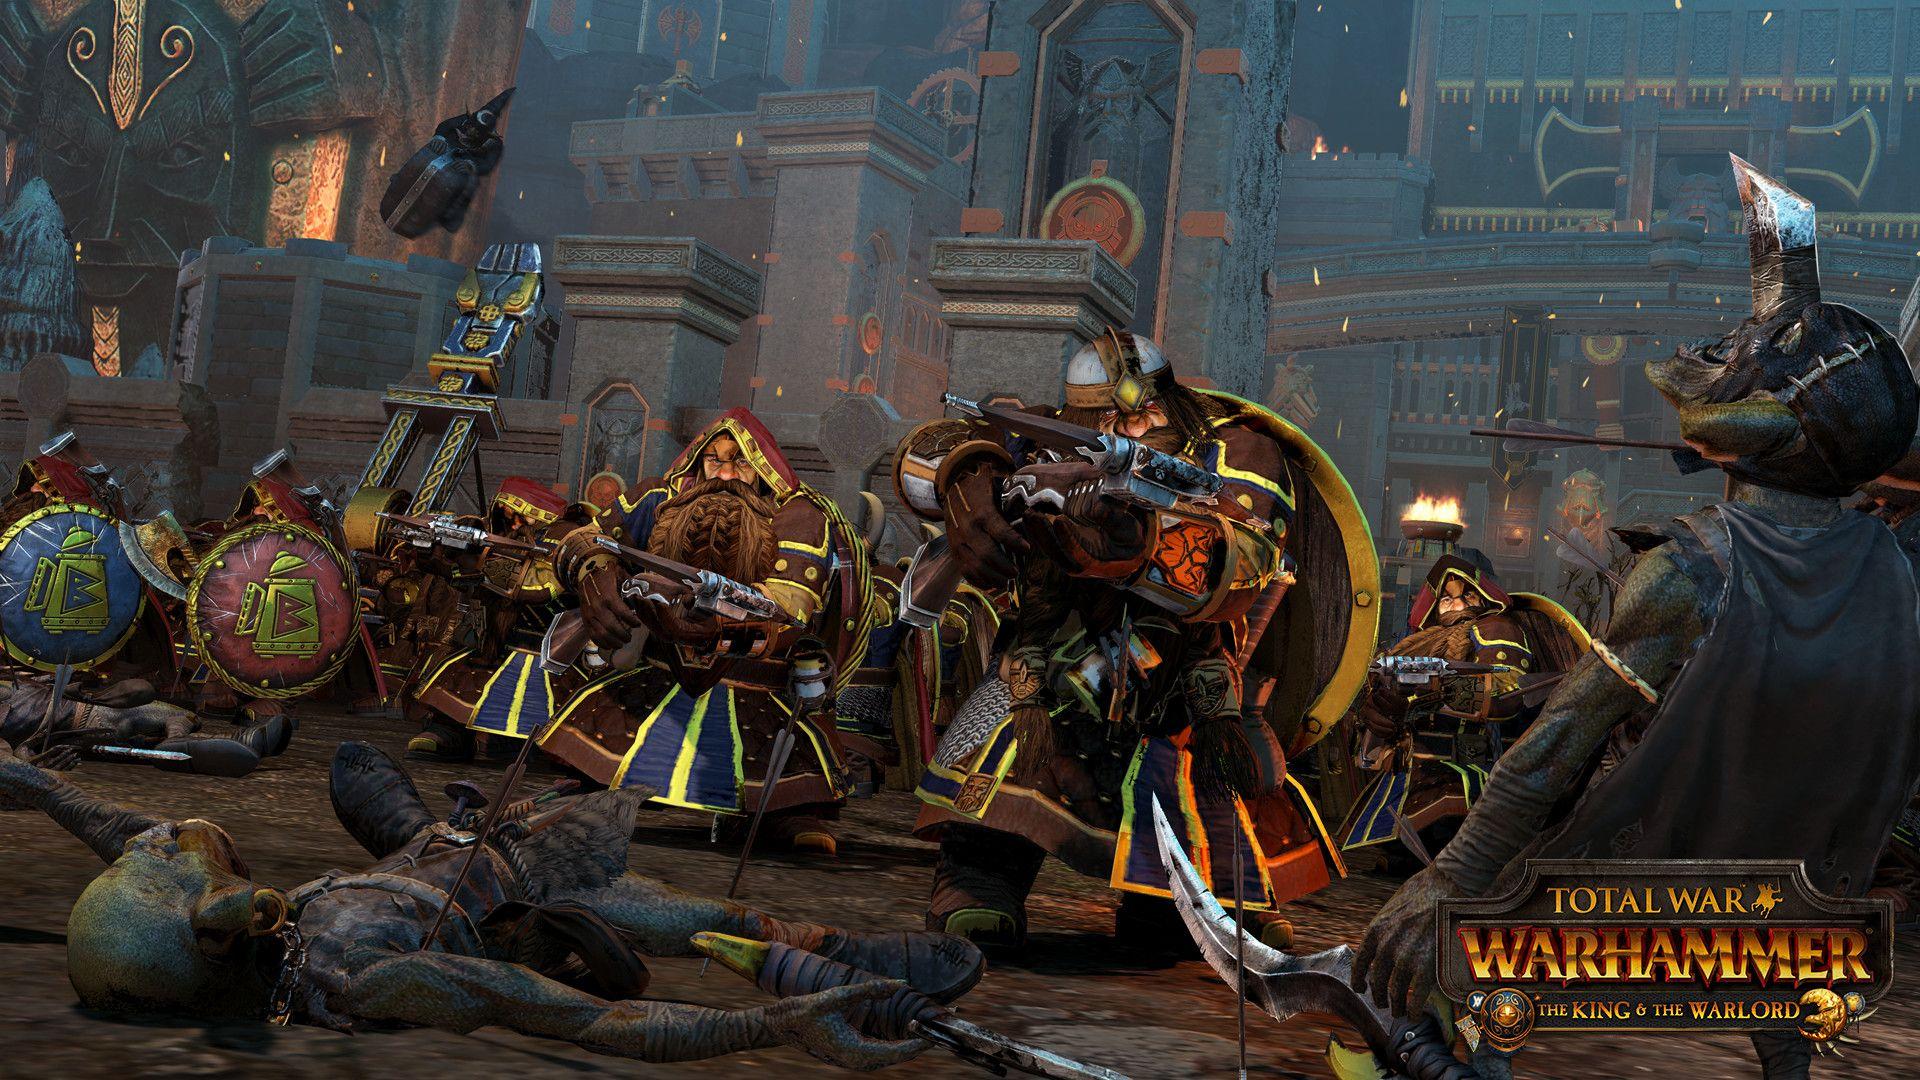 Total War: Warhammer DLC Adds Two New Legendary Lords